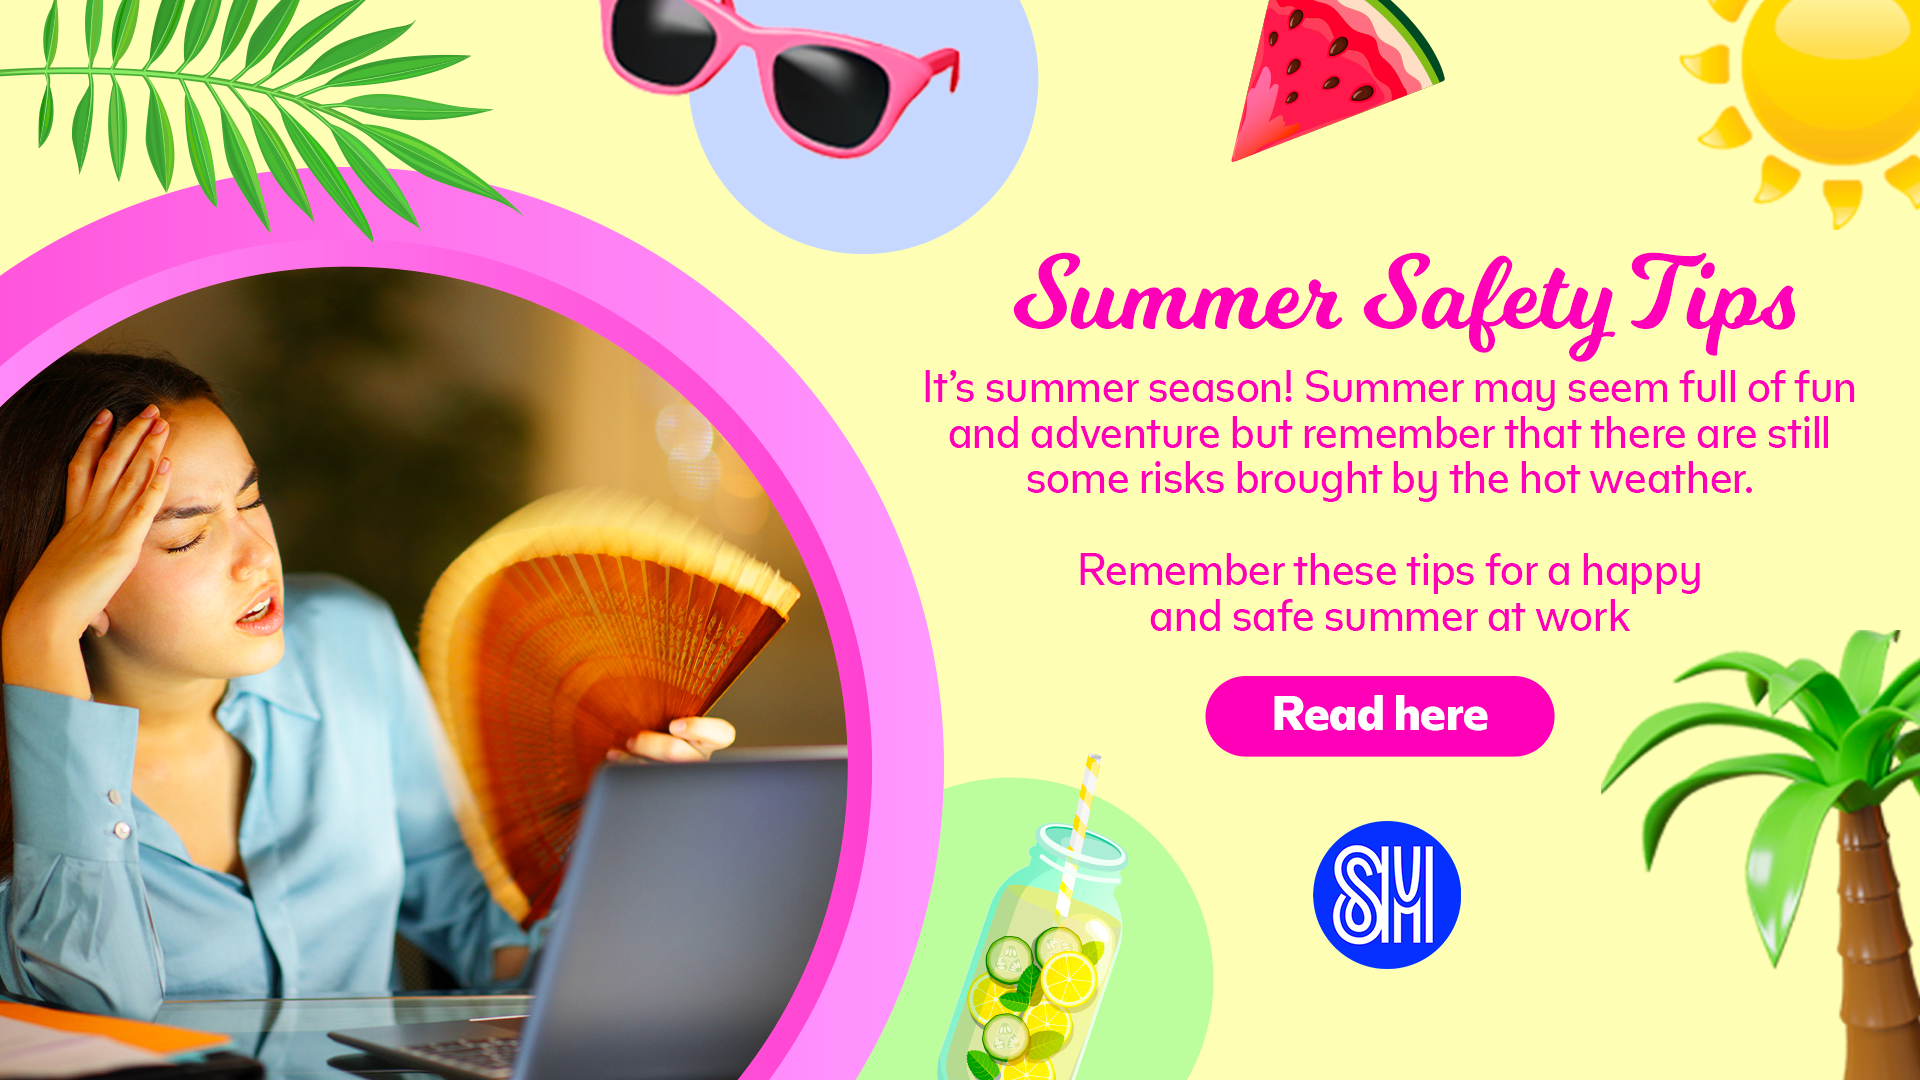 Have a #SMart and #SMashing Summer! 